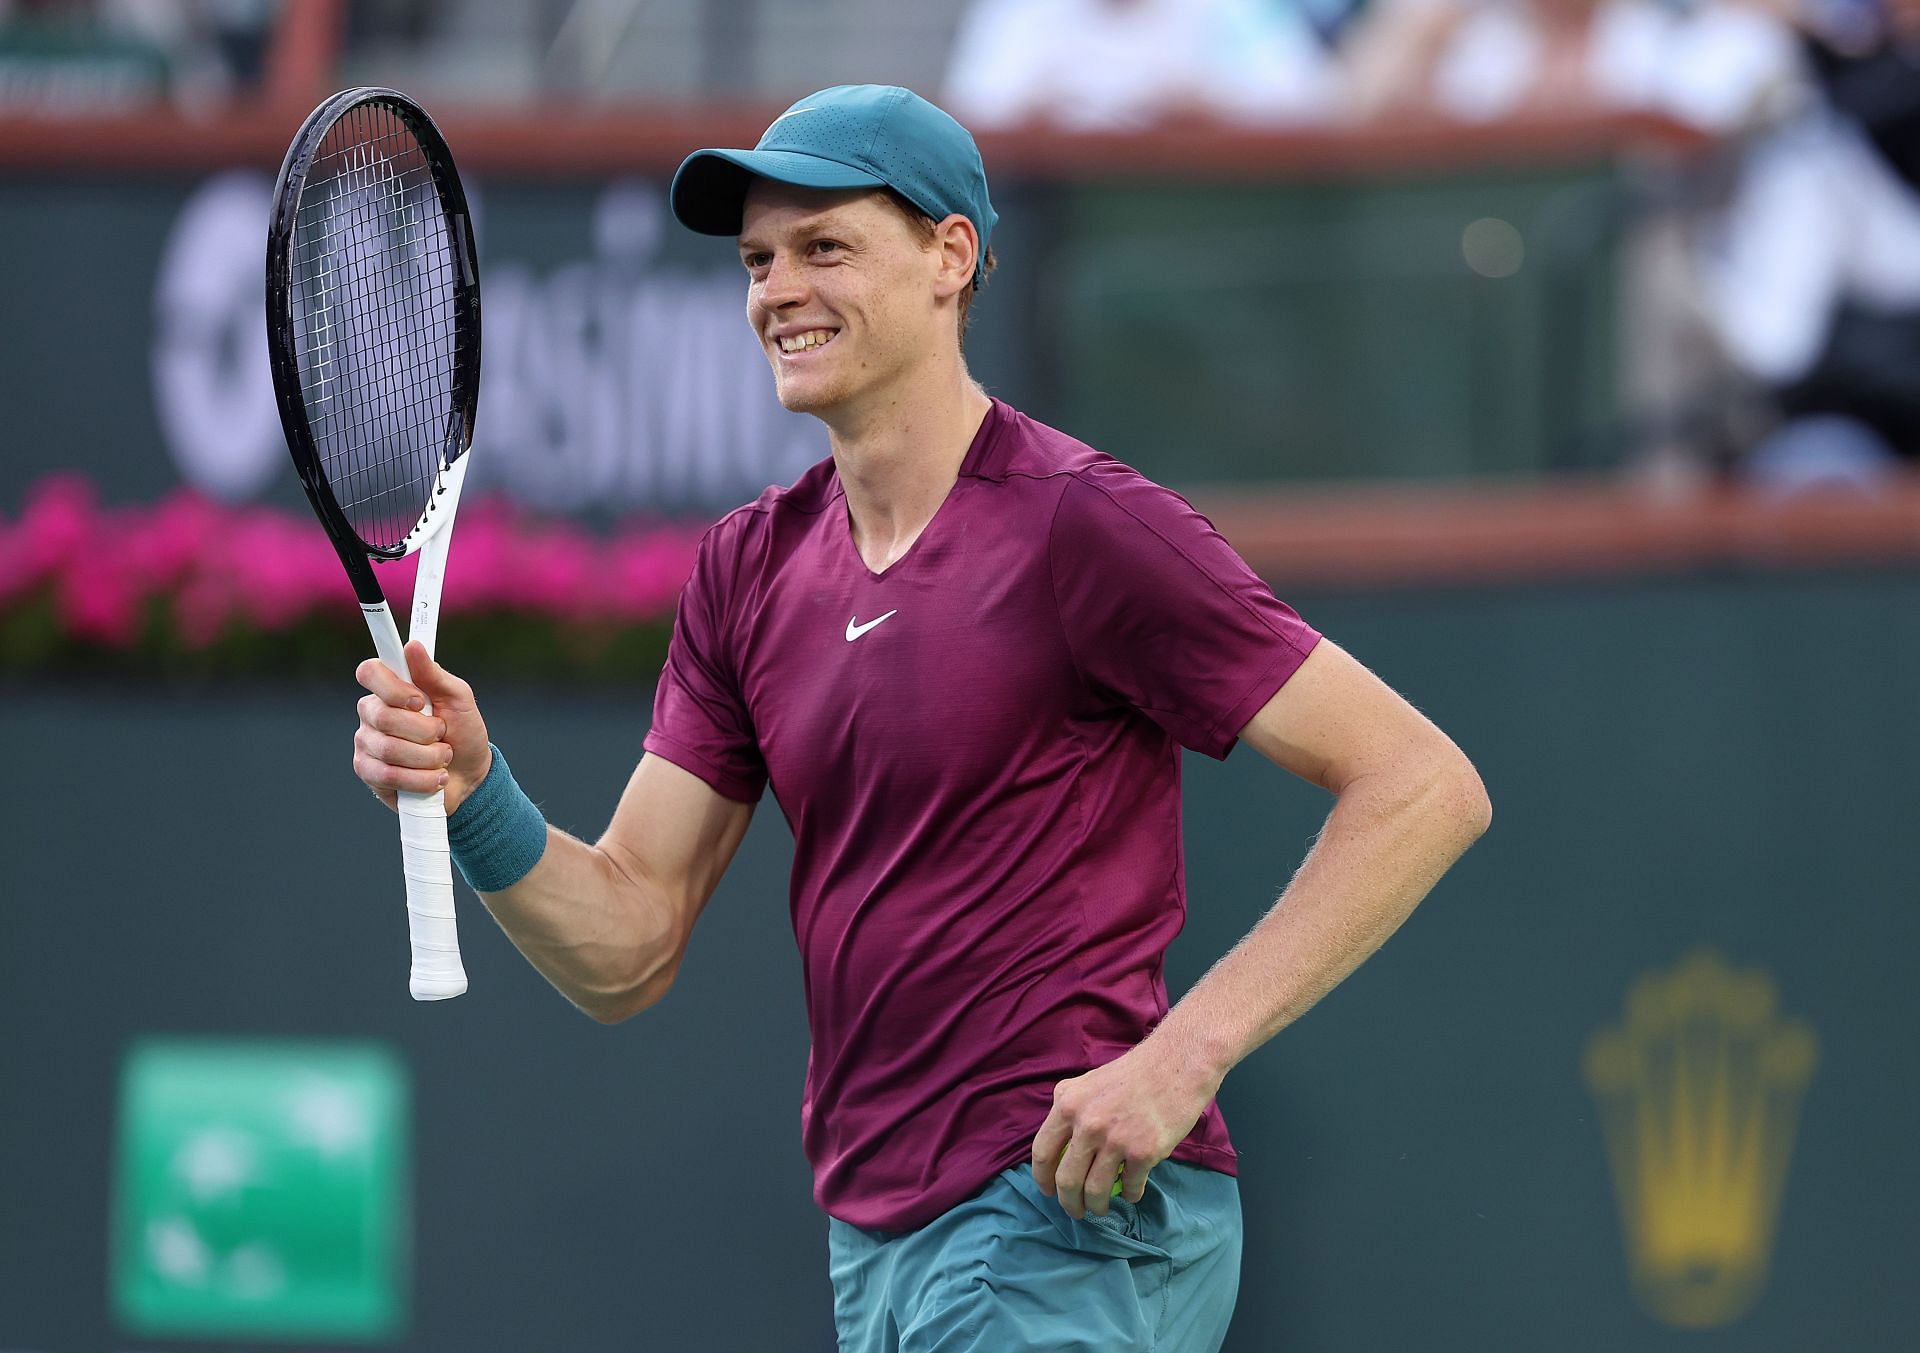 Miami Open 2023 Schedule Today TV schedule, start time, order of play, live stream details and more Day 9